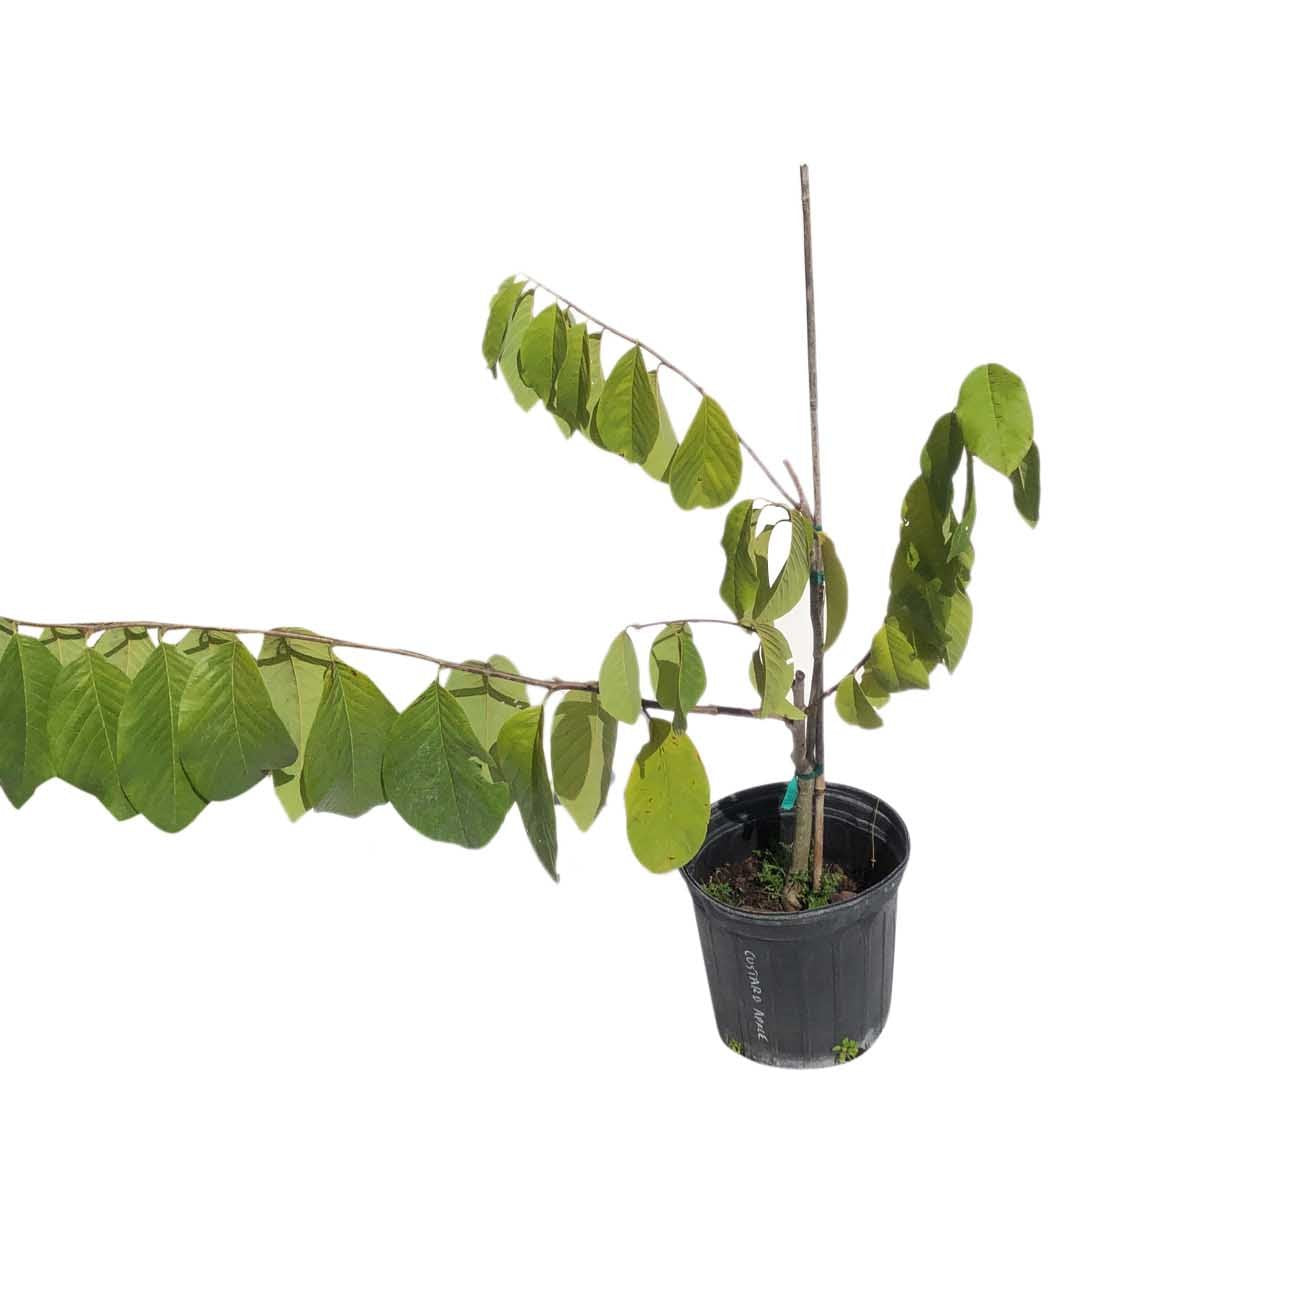 Atemoya Lisa Fruit Tree for Sale 3-Gal Container from Florida